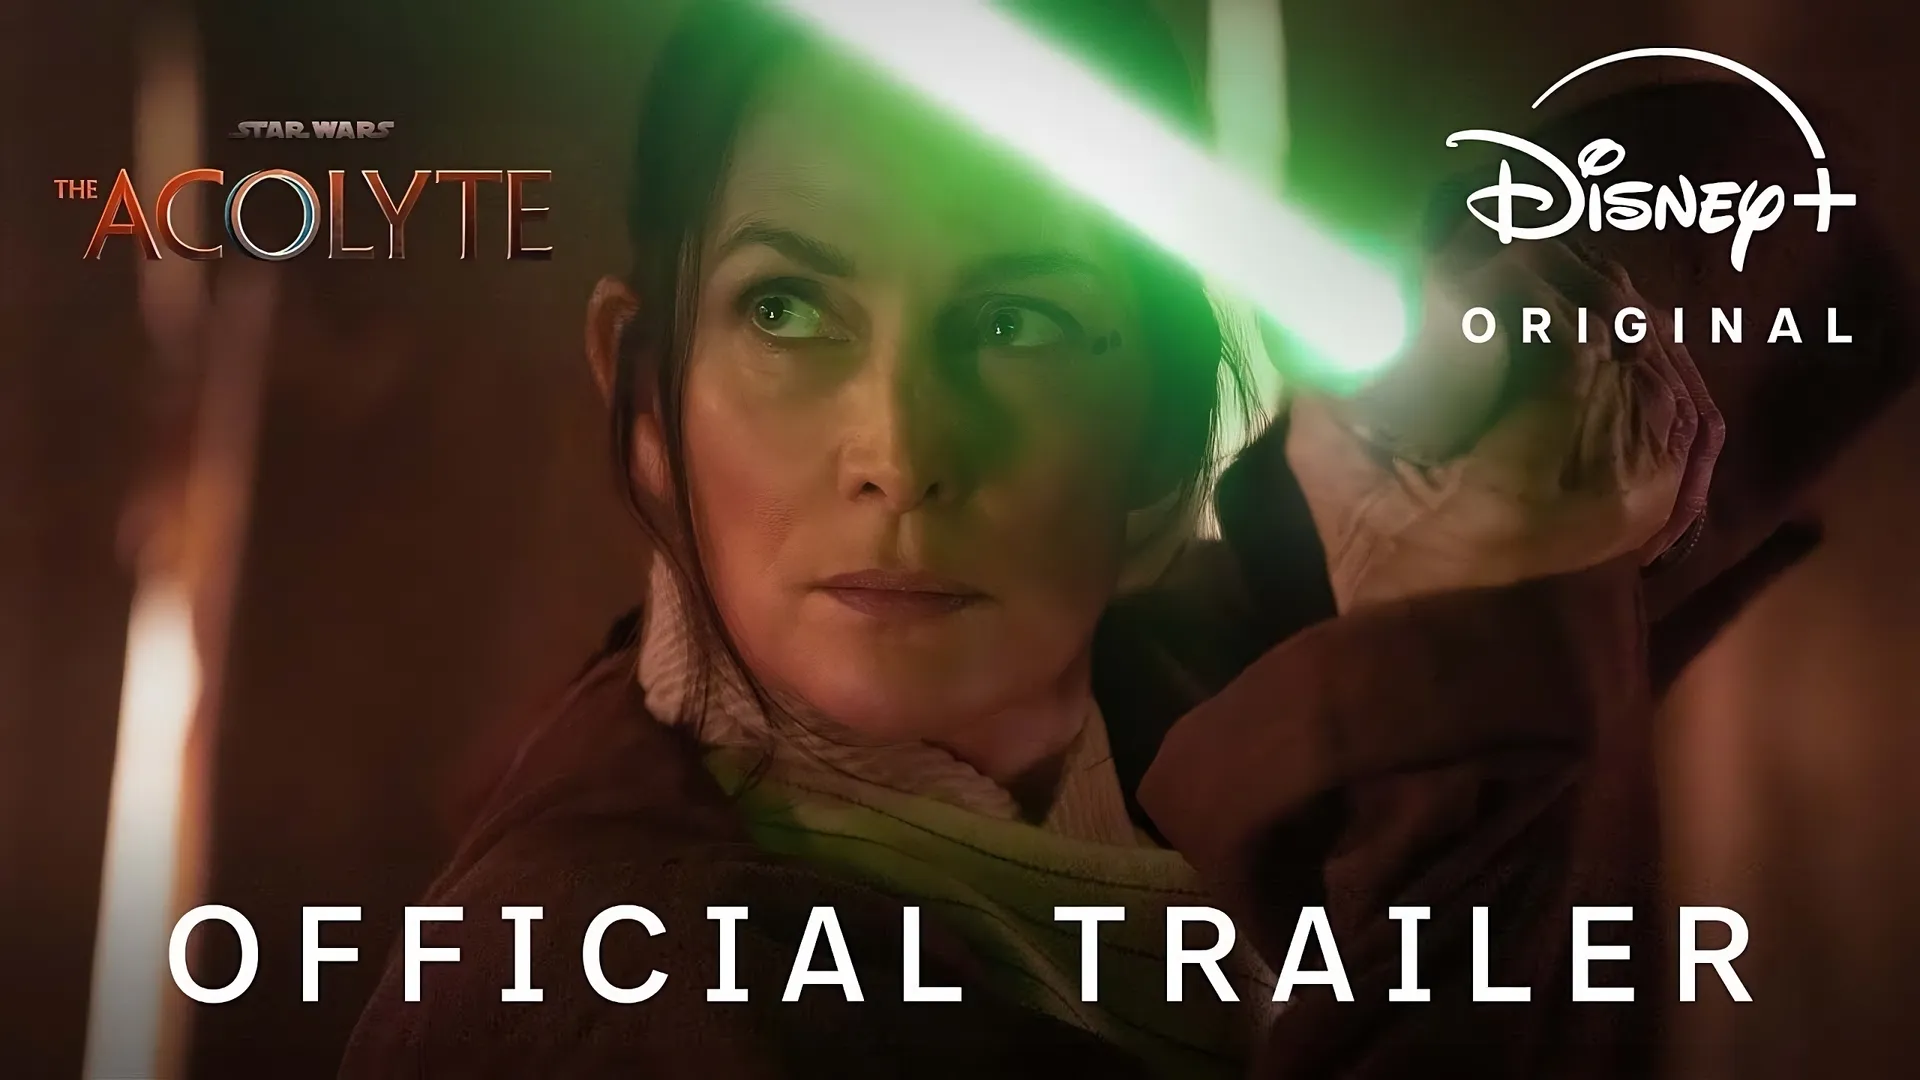 New trailer for another Original Star Wars Series Acolyte